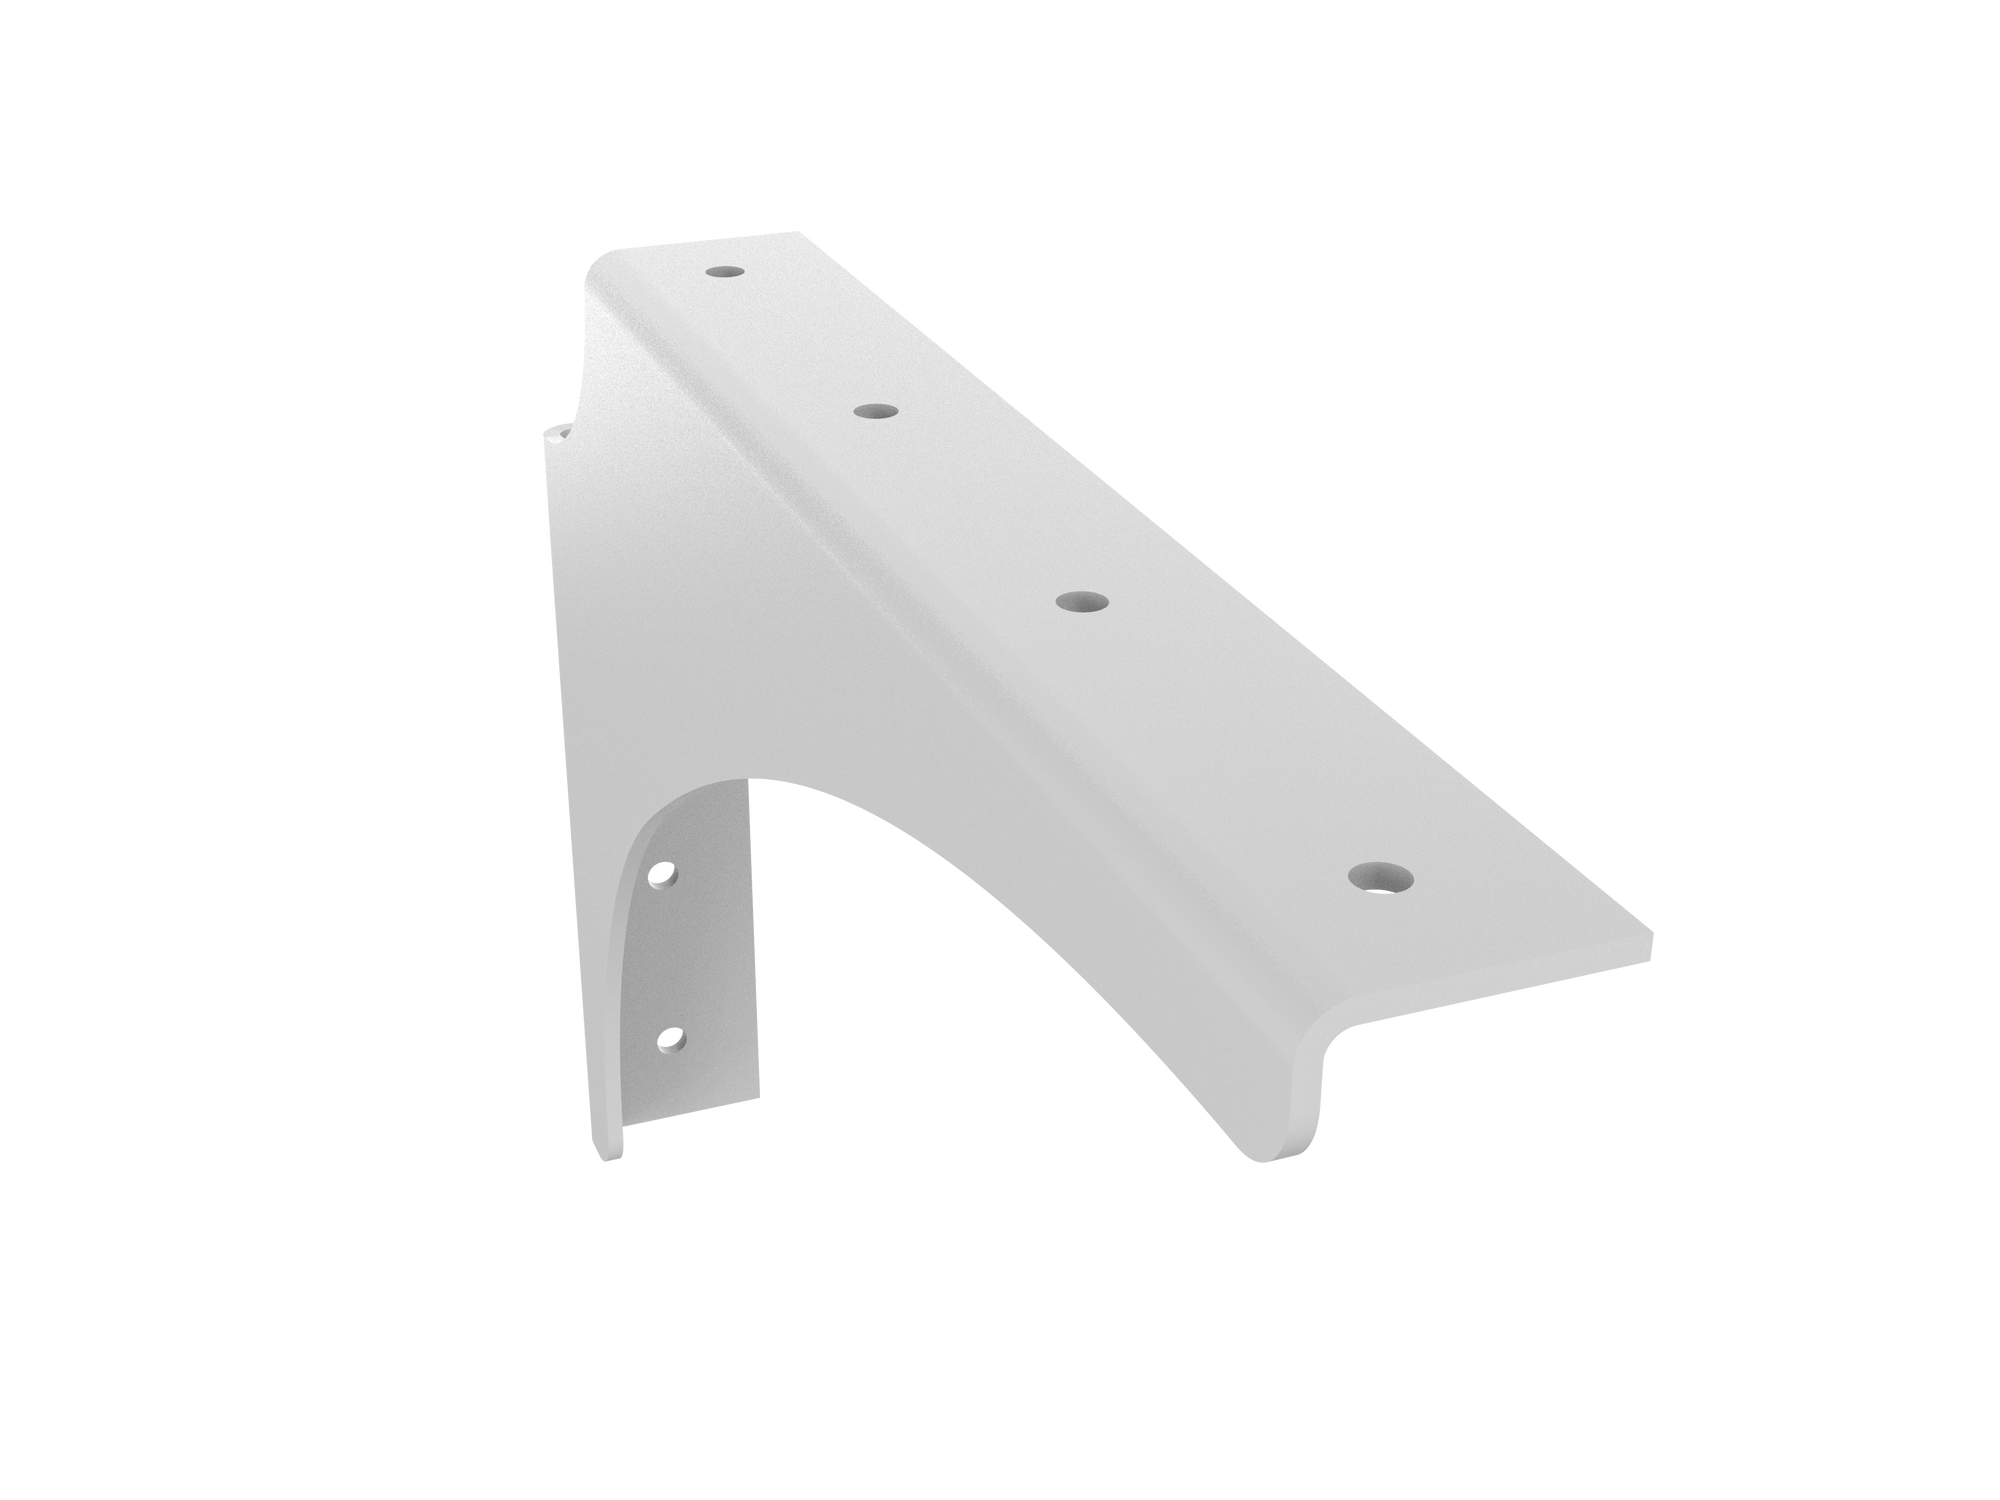 Universal Commercial Support Bracket - 12" x 8" with White Powder Coat Finish. Supports floating ADA-compliant vanities, desks, shelving, countertops, and more.